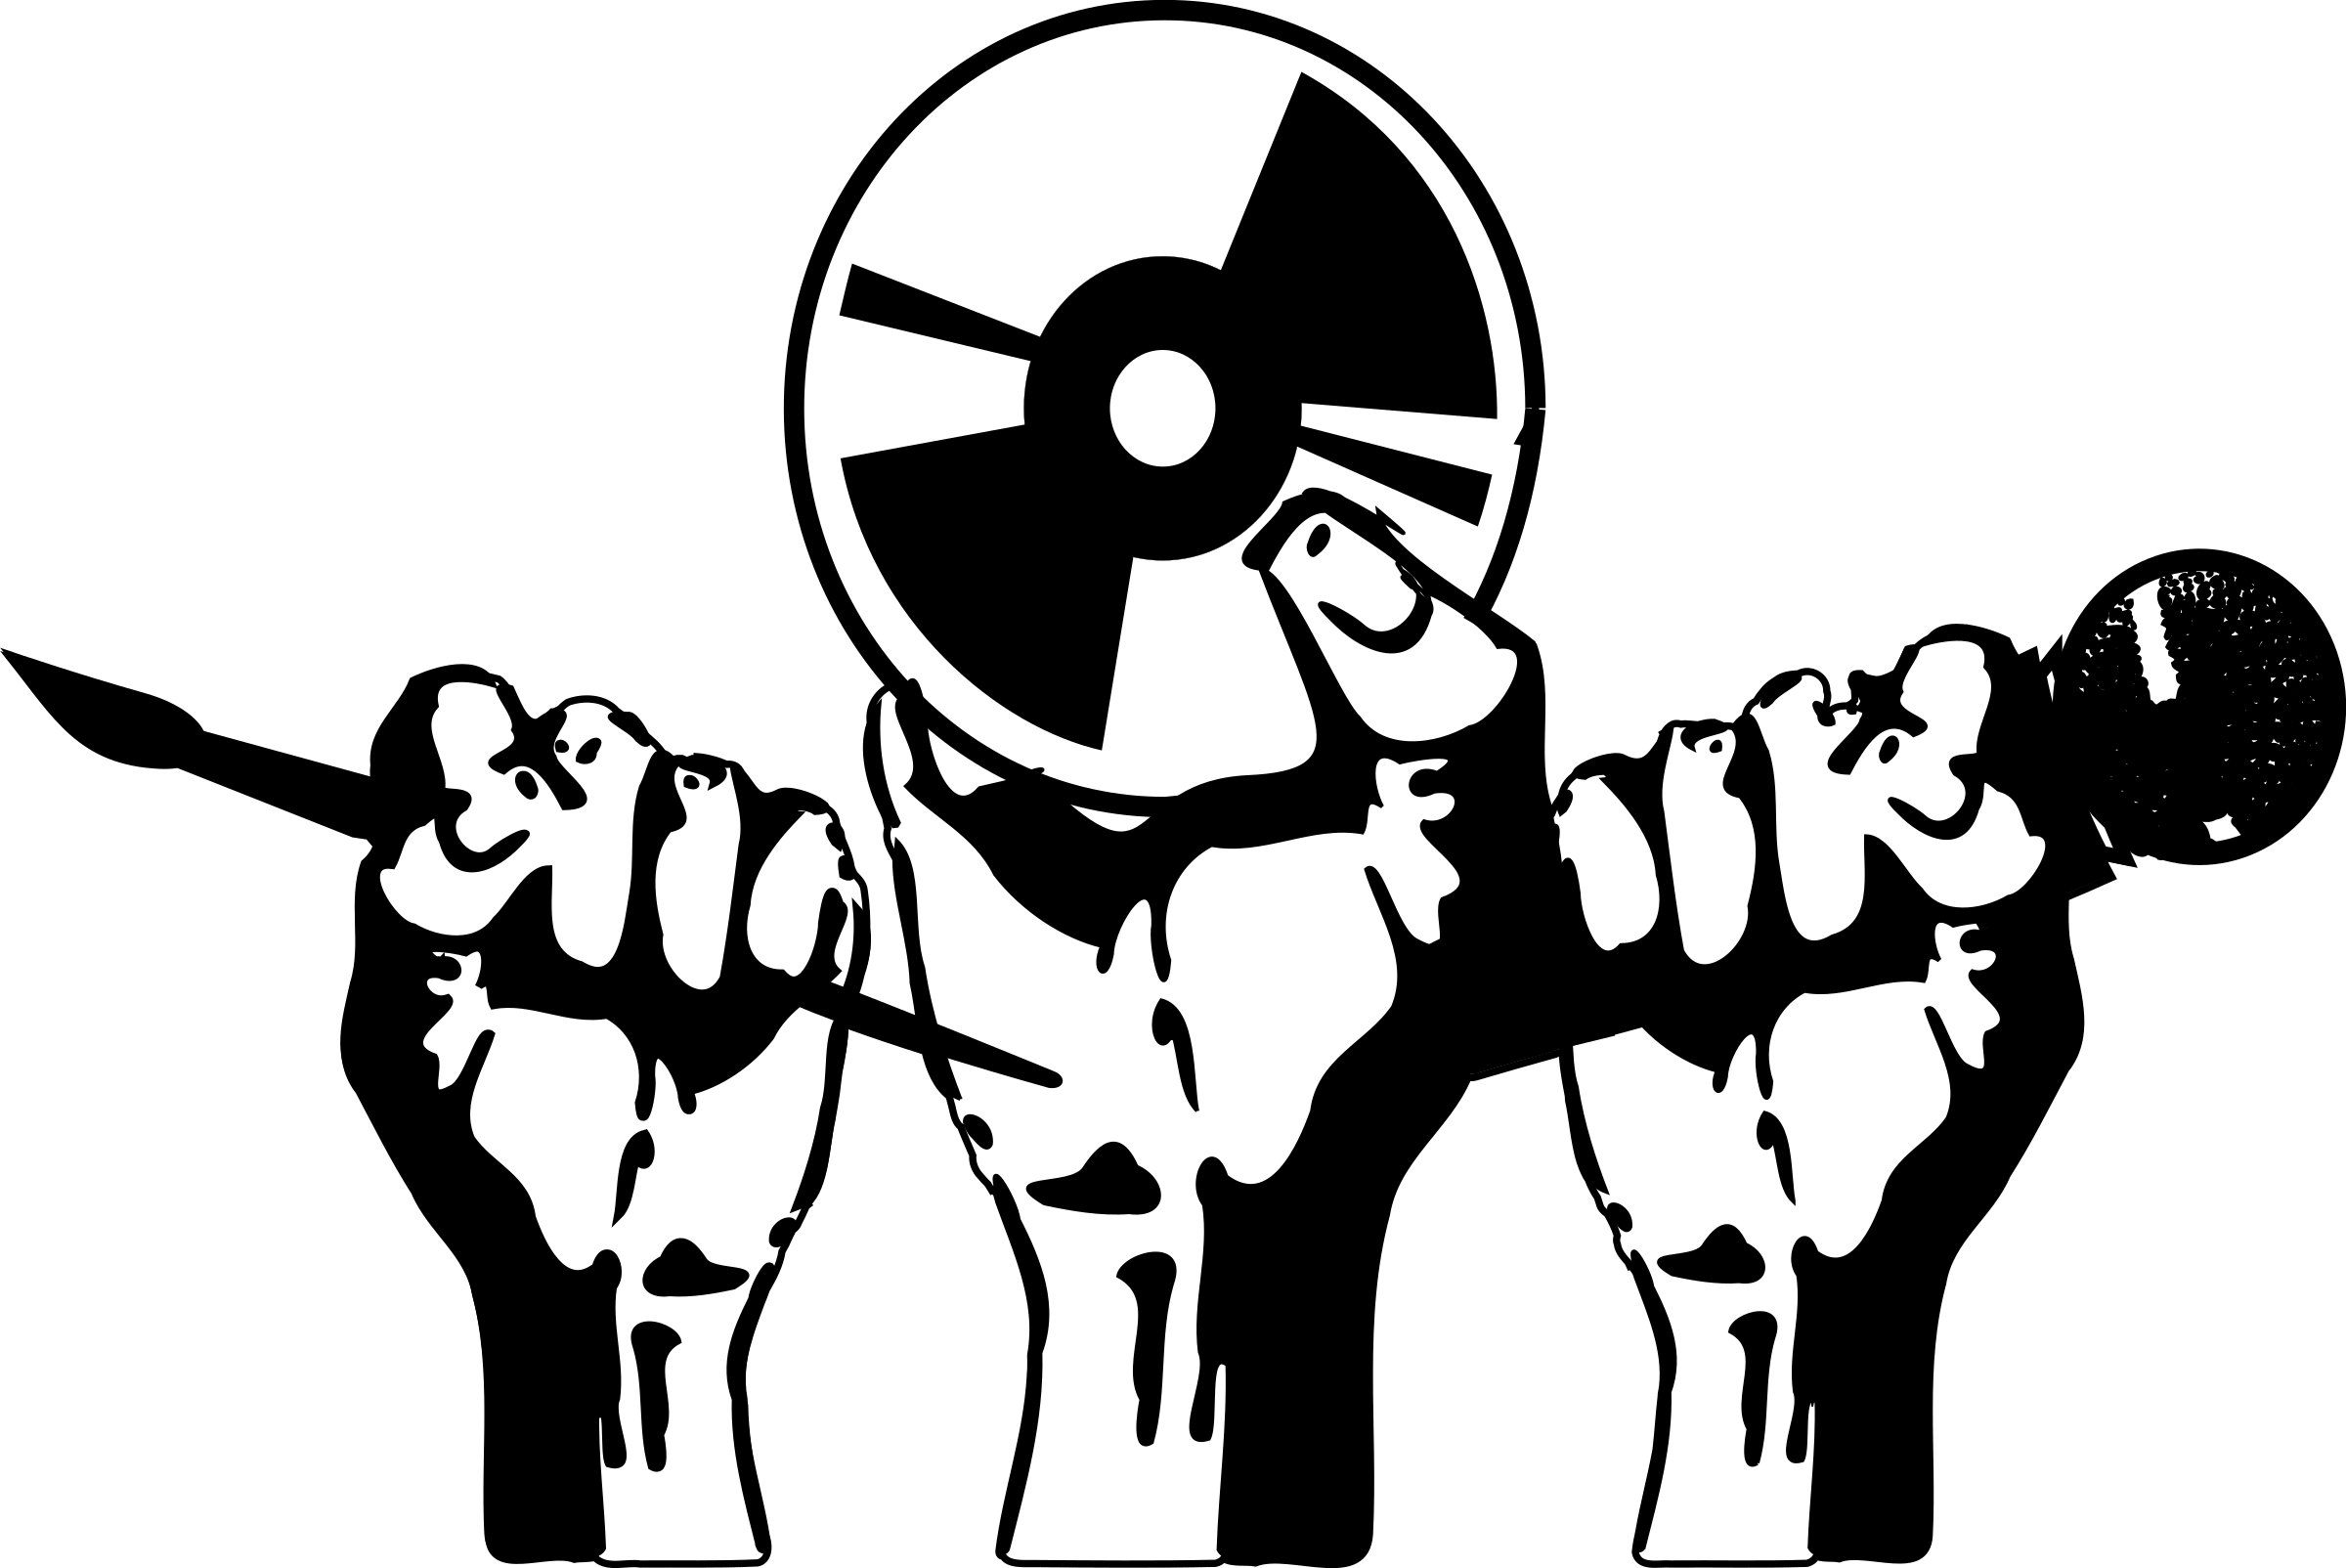 Fighting clipart freedom. Bail group creative hands